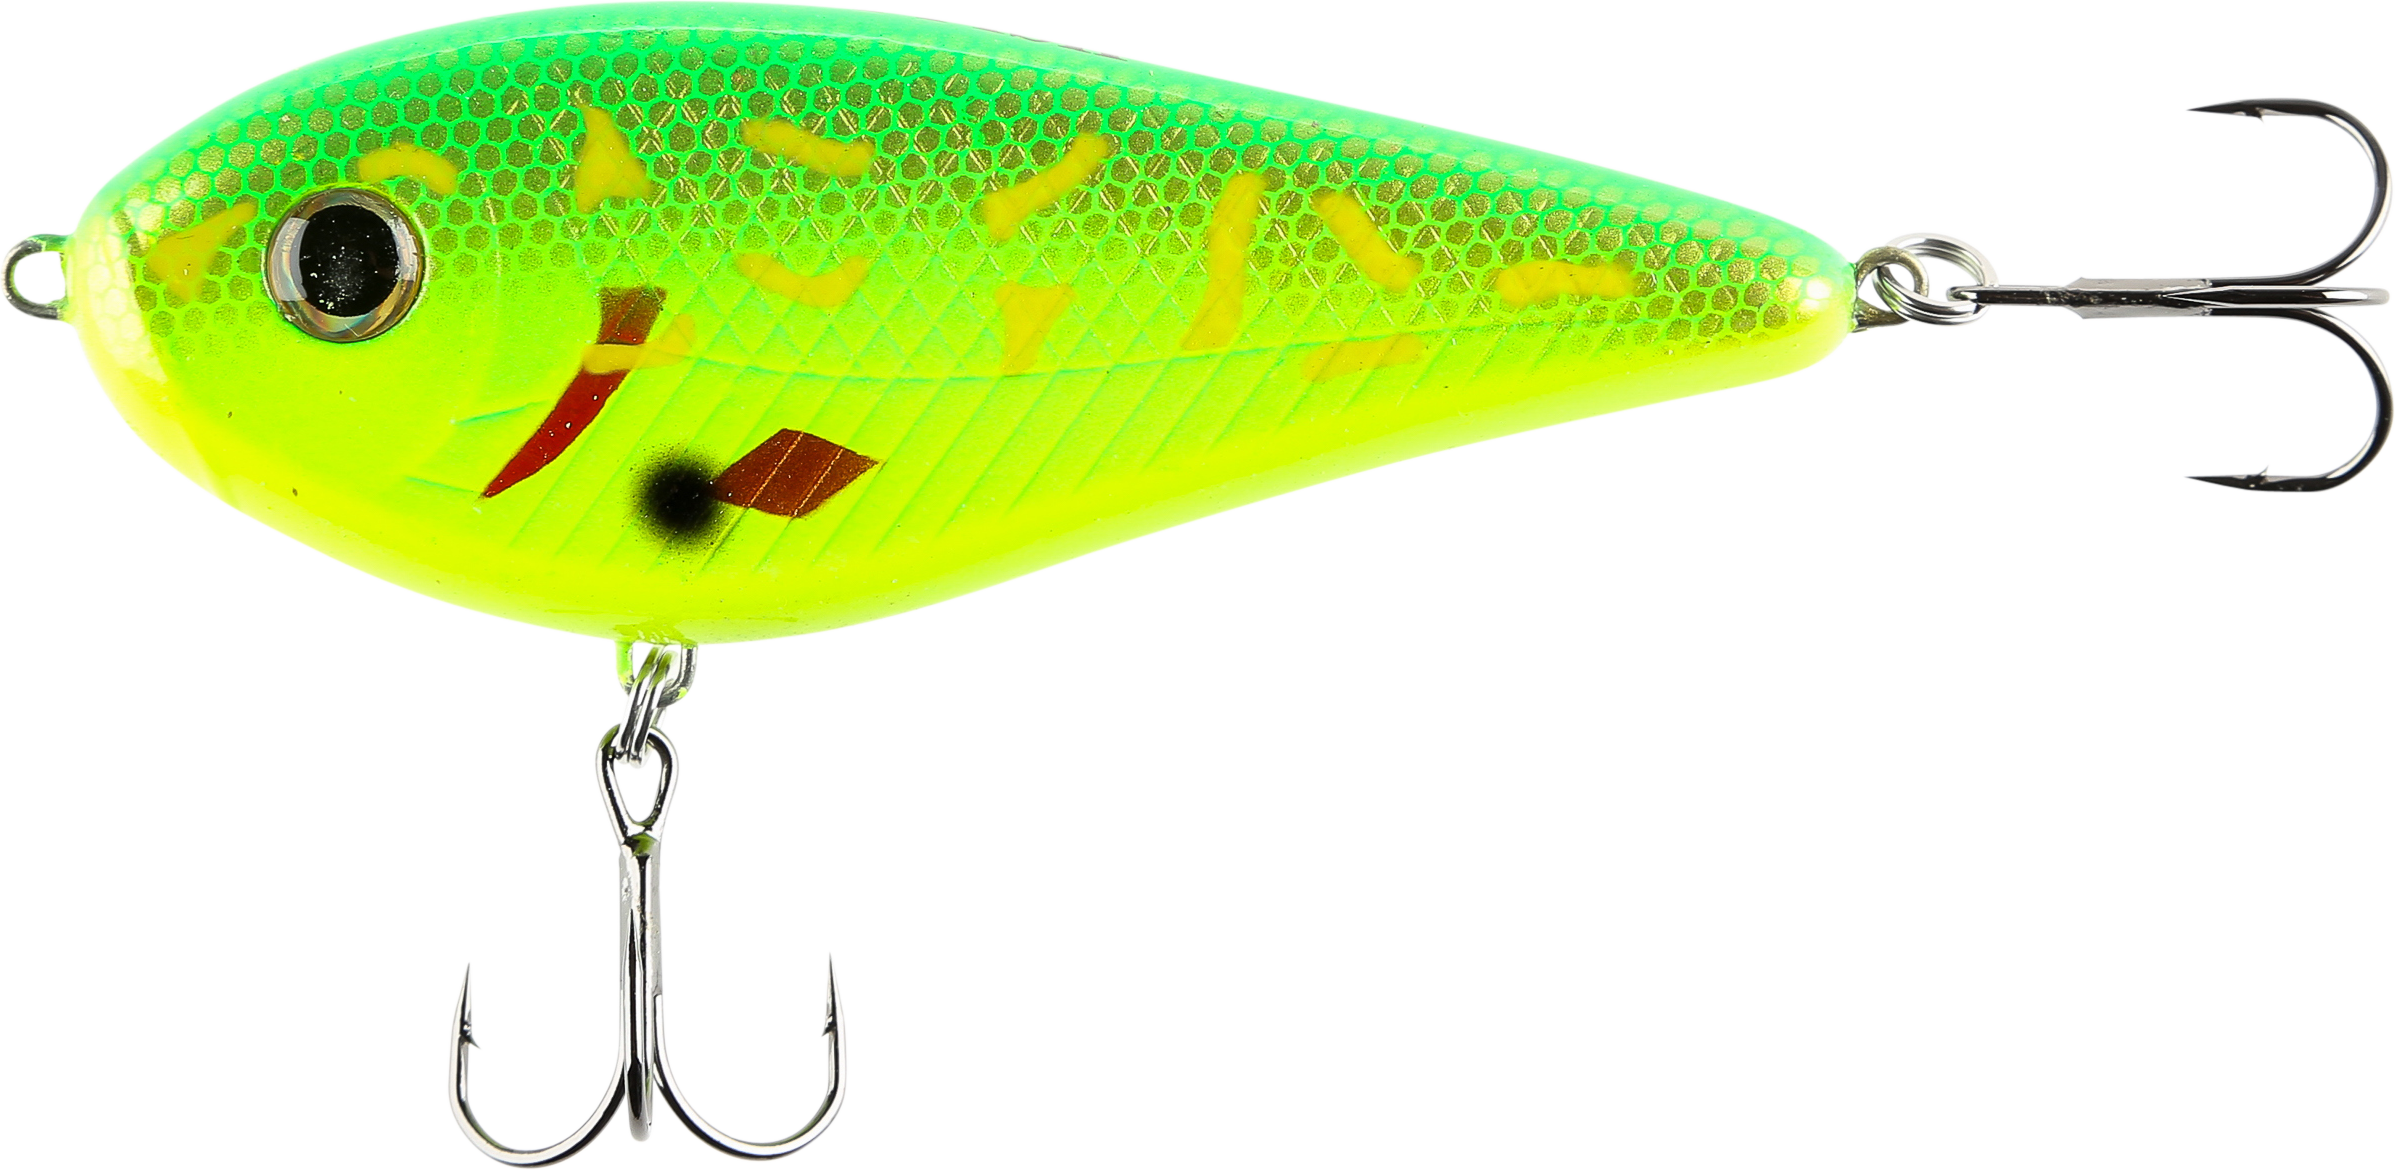 iFish The Guide 125 mm Hot Pike